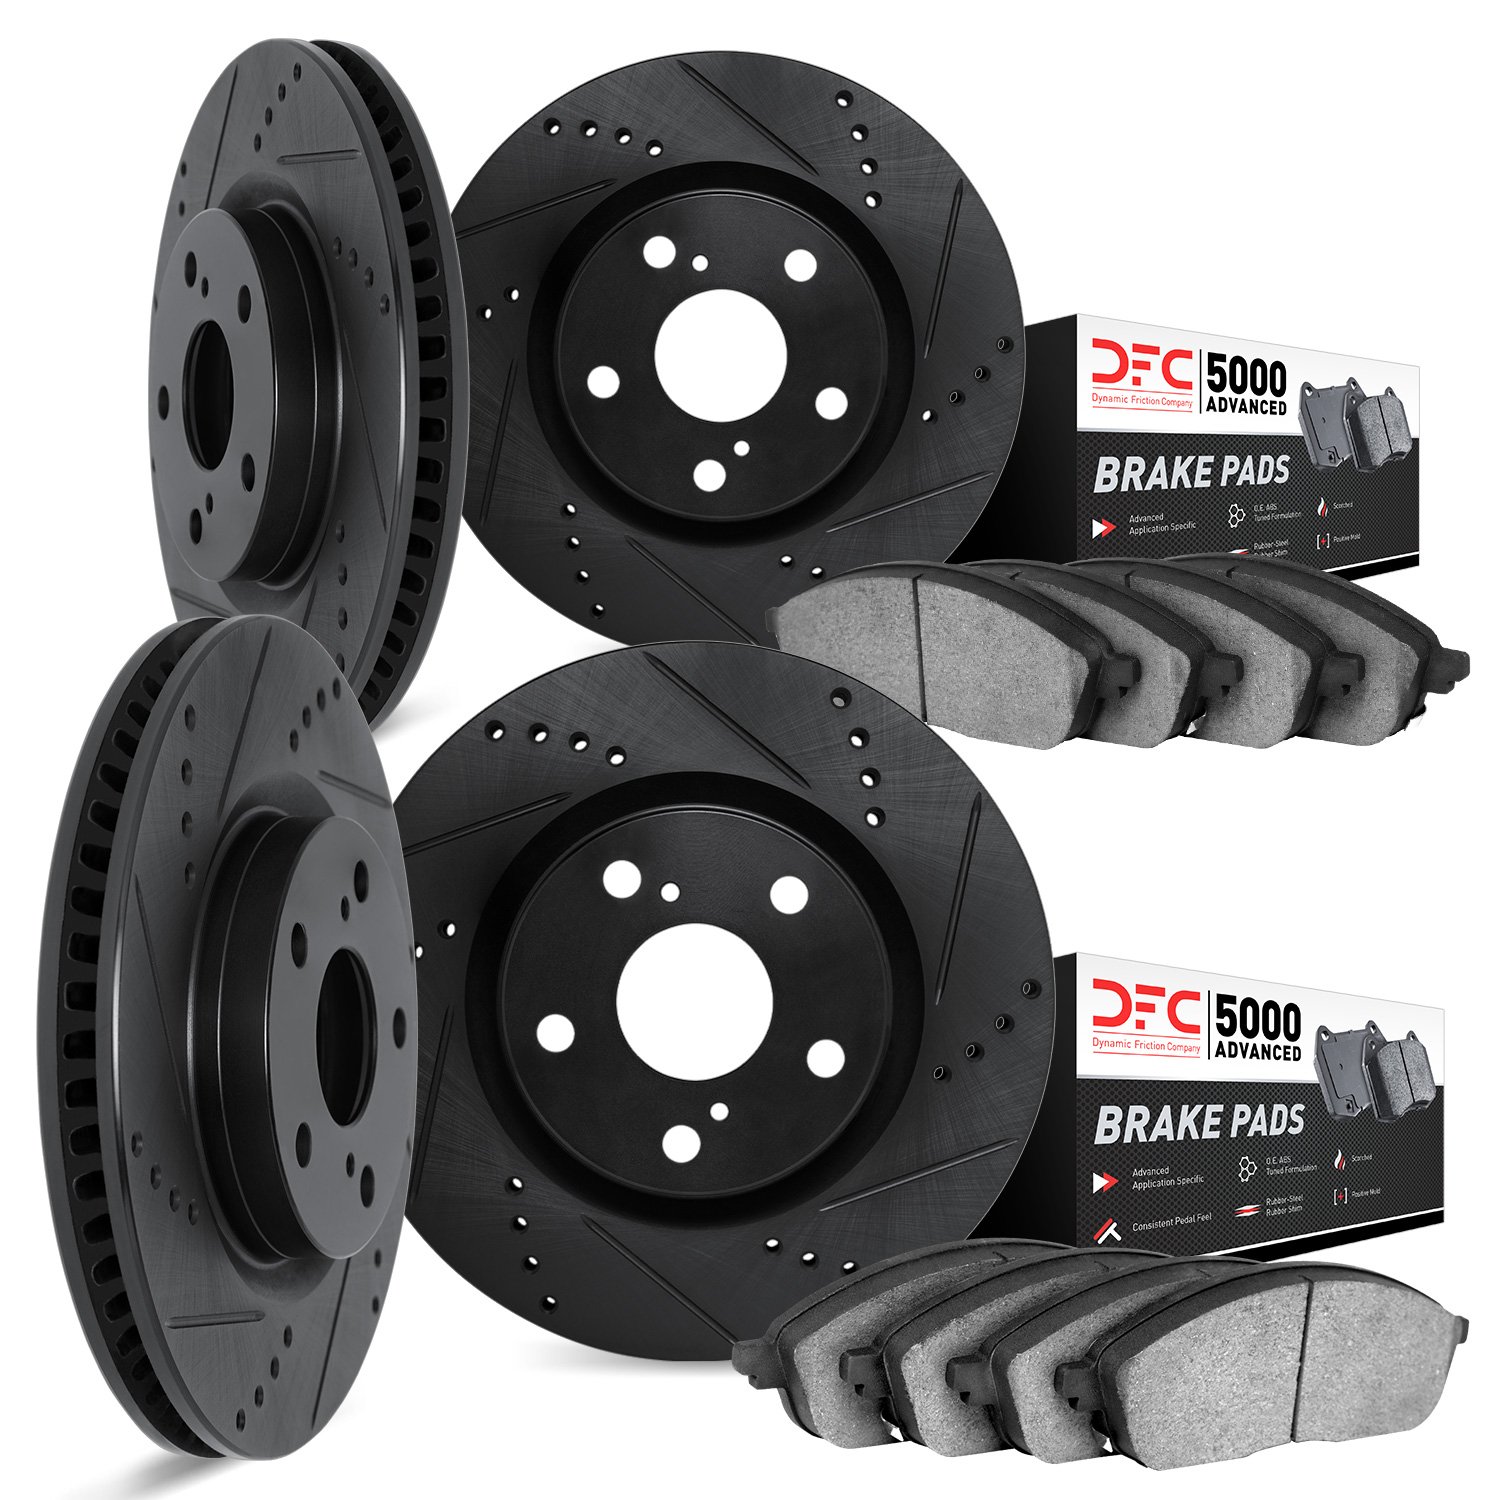 8504-31082 Drilled/Slotted Brake Rotors w/5000 Advanced Brake Pads Kit [Black], 2006-2008 BMW, Position: Front and Rear